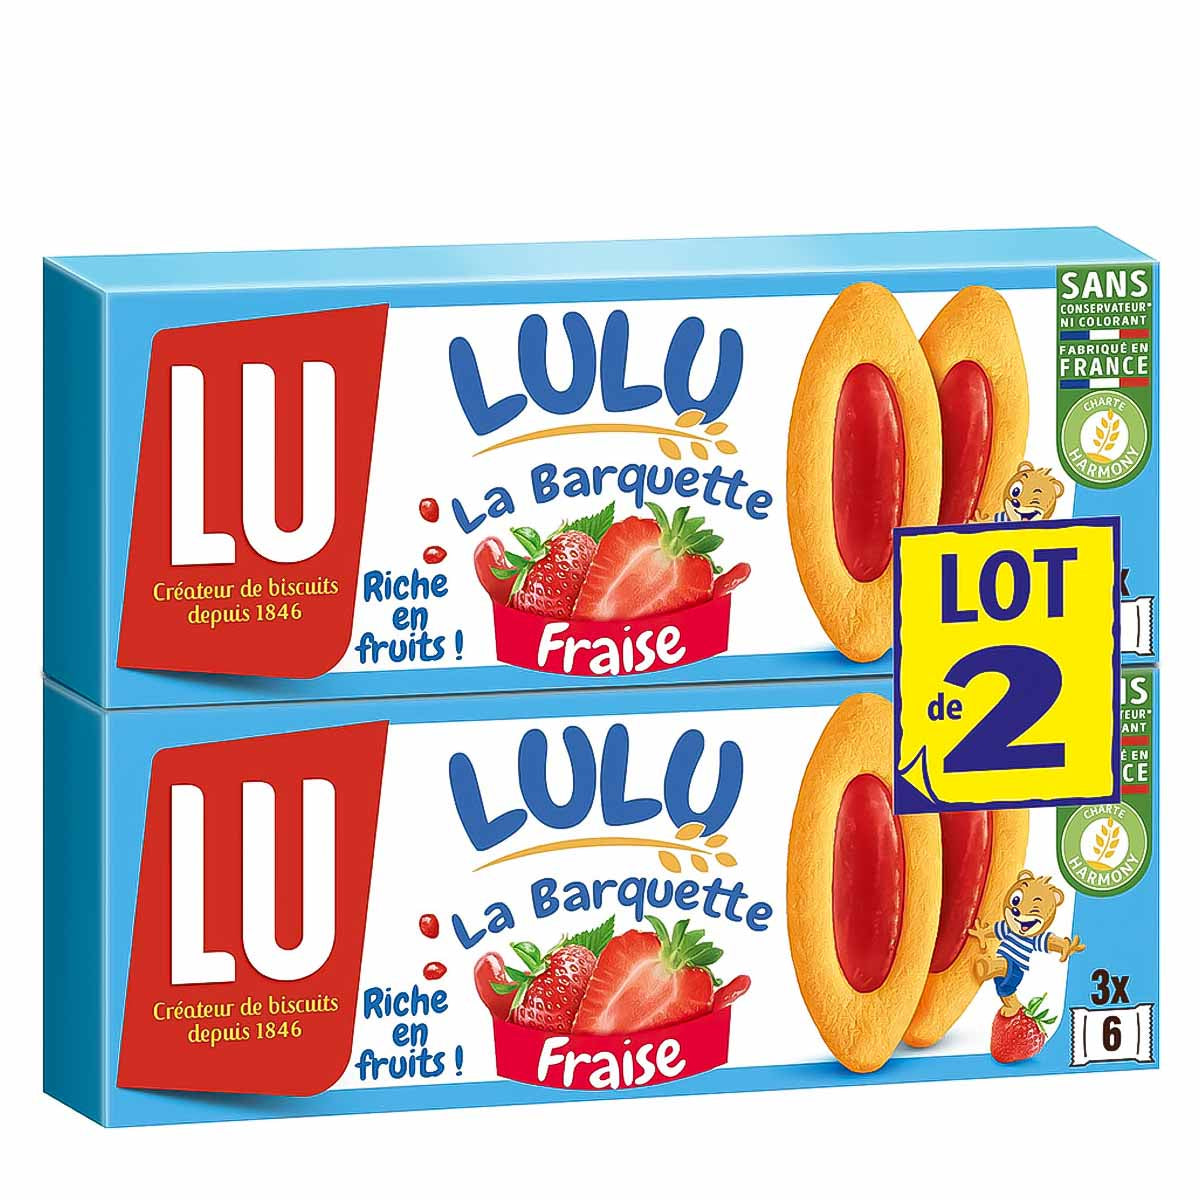 LU Strawberry Barquette Cookies, 2 Pack, 2 x 4.2 oz (240 g)